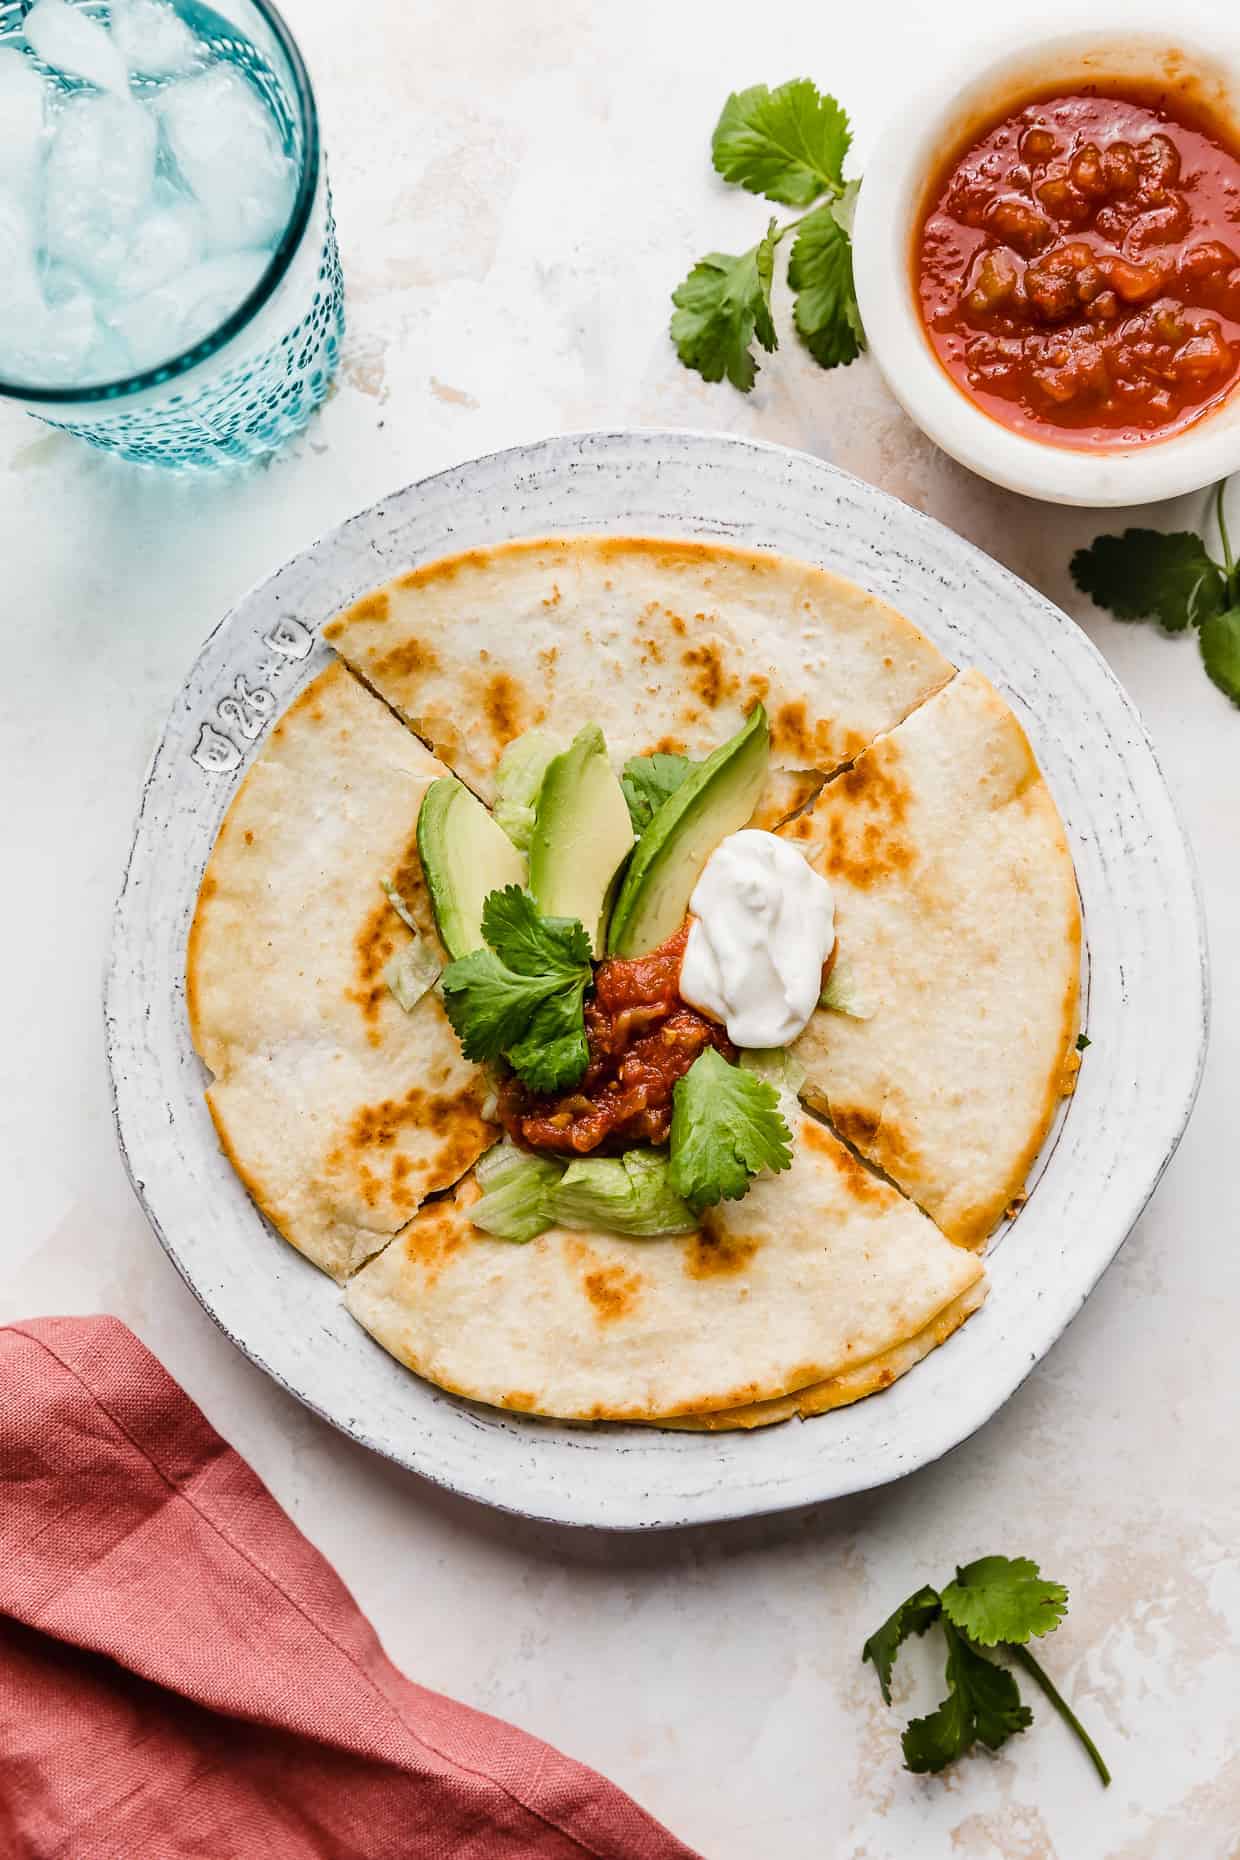 A cheese quesadilla on a white plate that has been cut into 4 wedges, topped with salsa, avocado, sour cream, and lettuce.